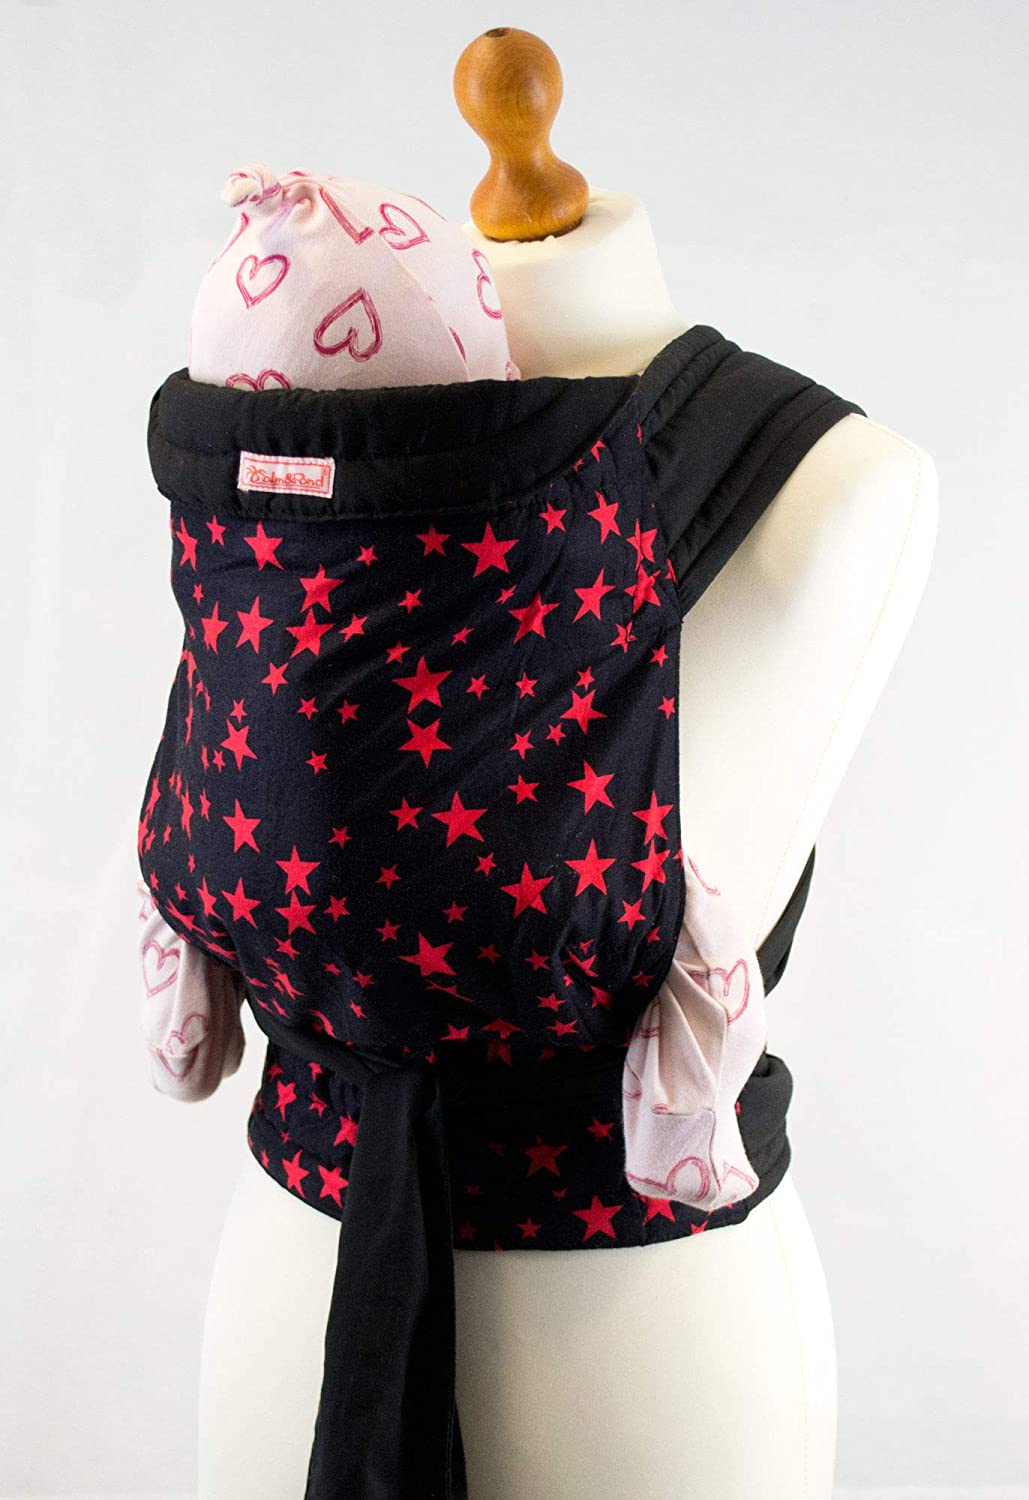 Palm and Pond Mei Tai Baby Carrier – Black with Red Stars